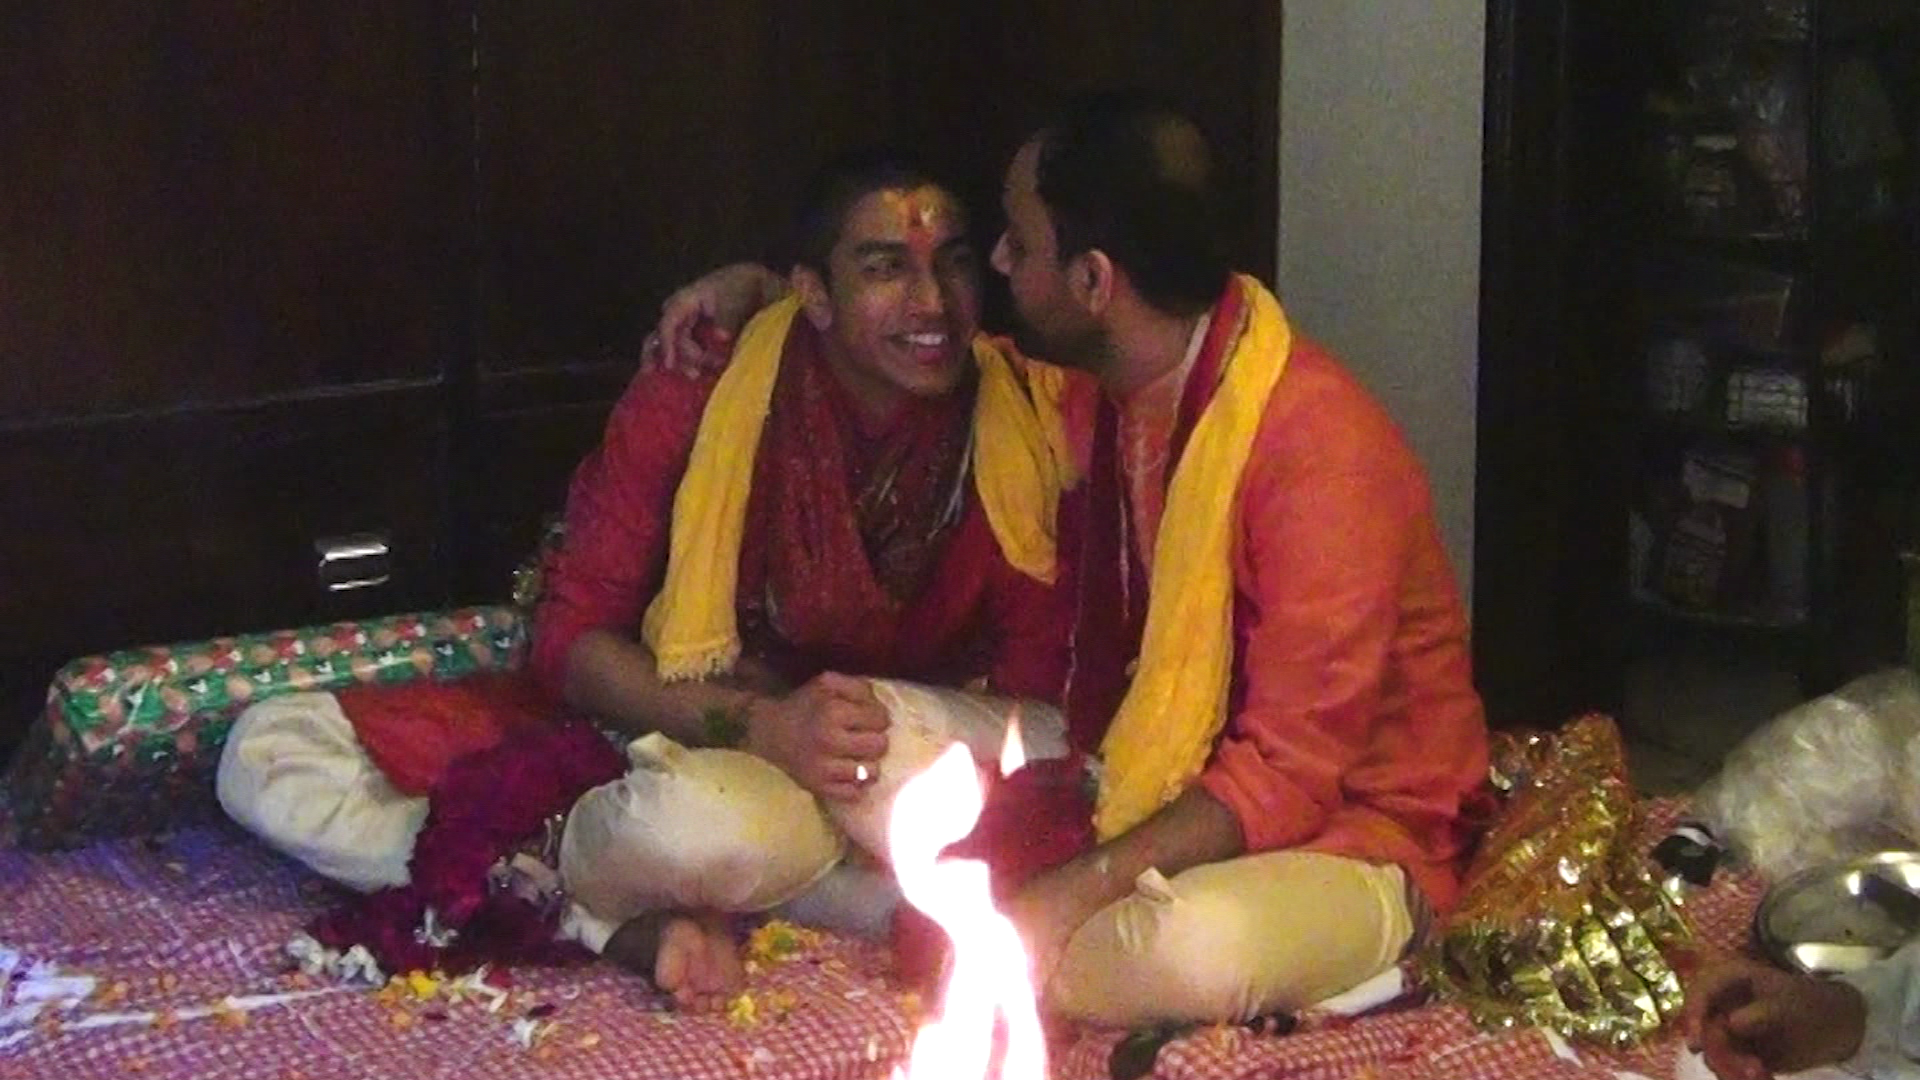 Xxx Raj In Wap Sleeping Videos - This Indian gay couple got secretly married. Now they are fighting for  recognition | CNN